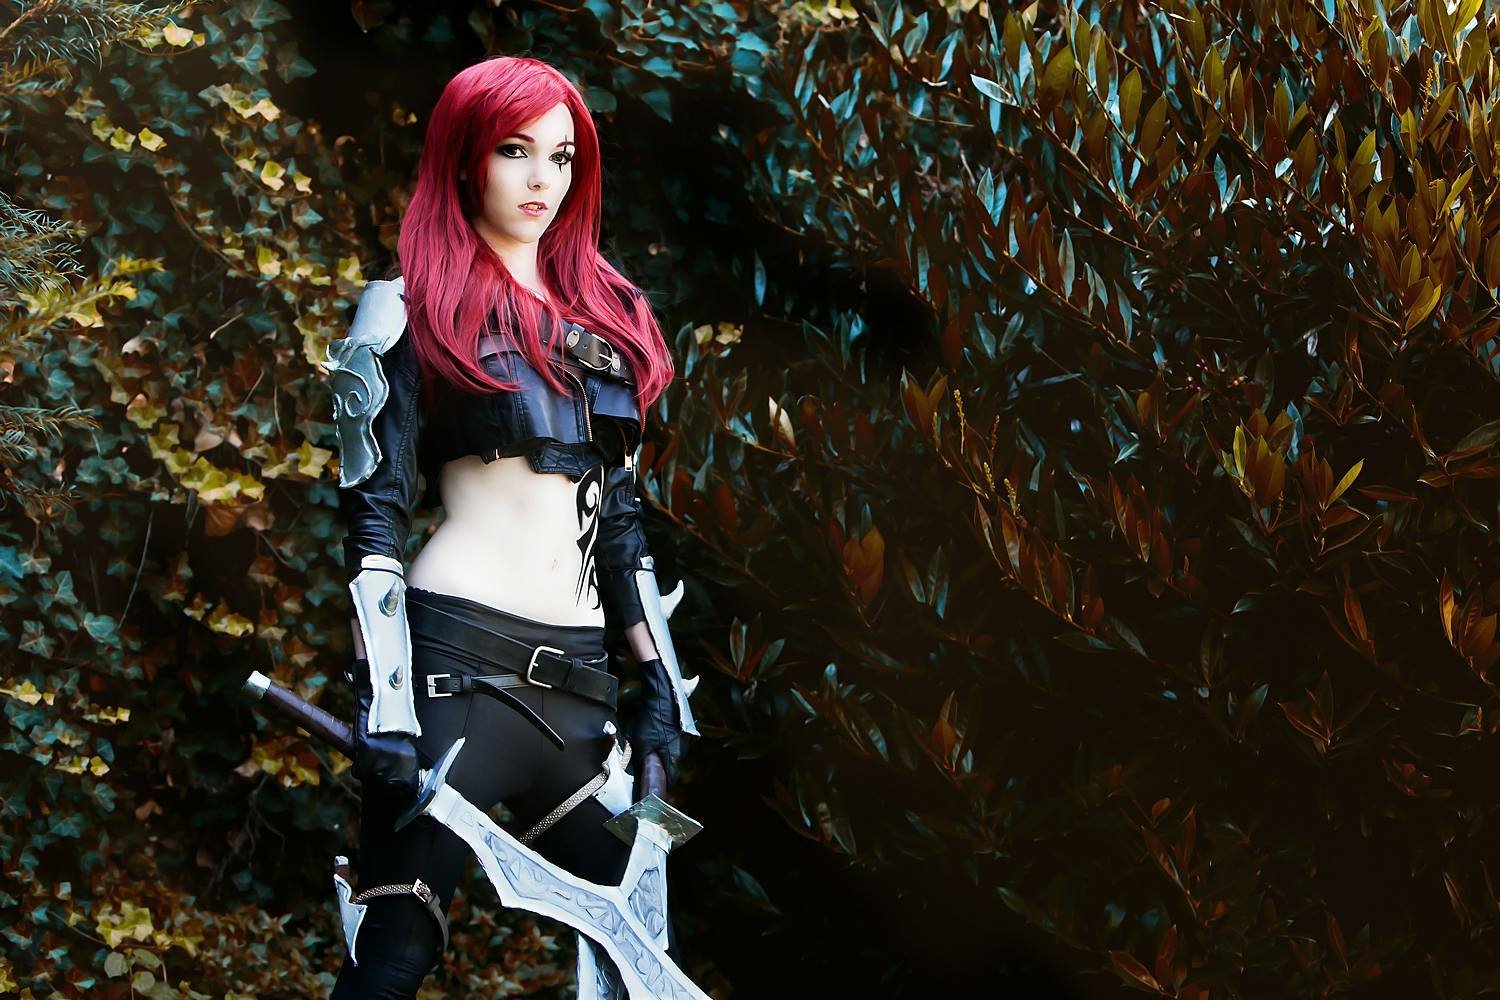 1500x1000 Cosplay Wallpaper Background Image. 